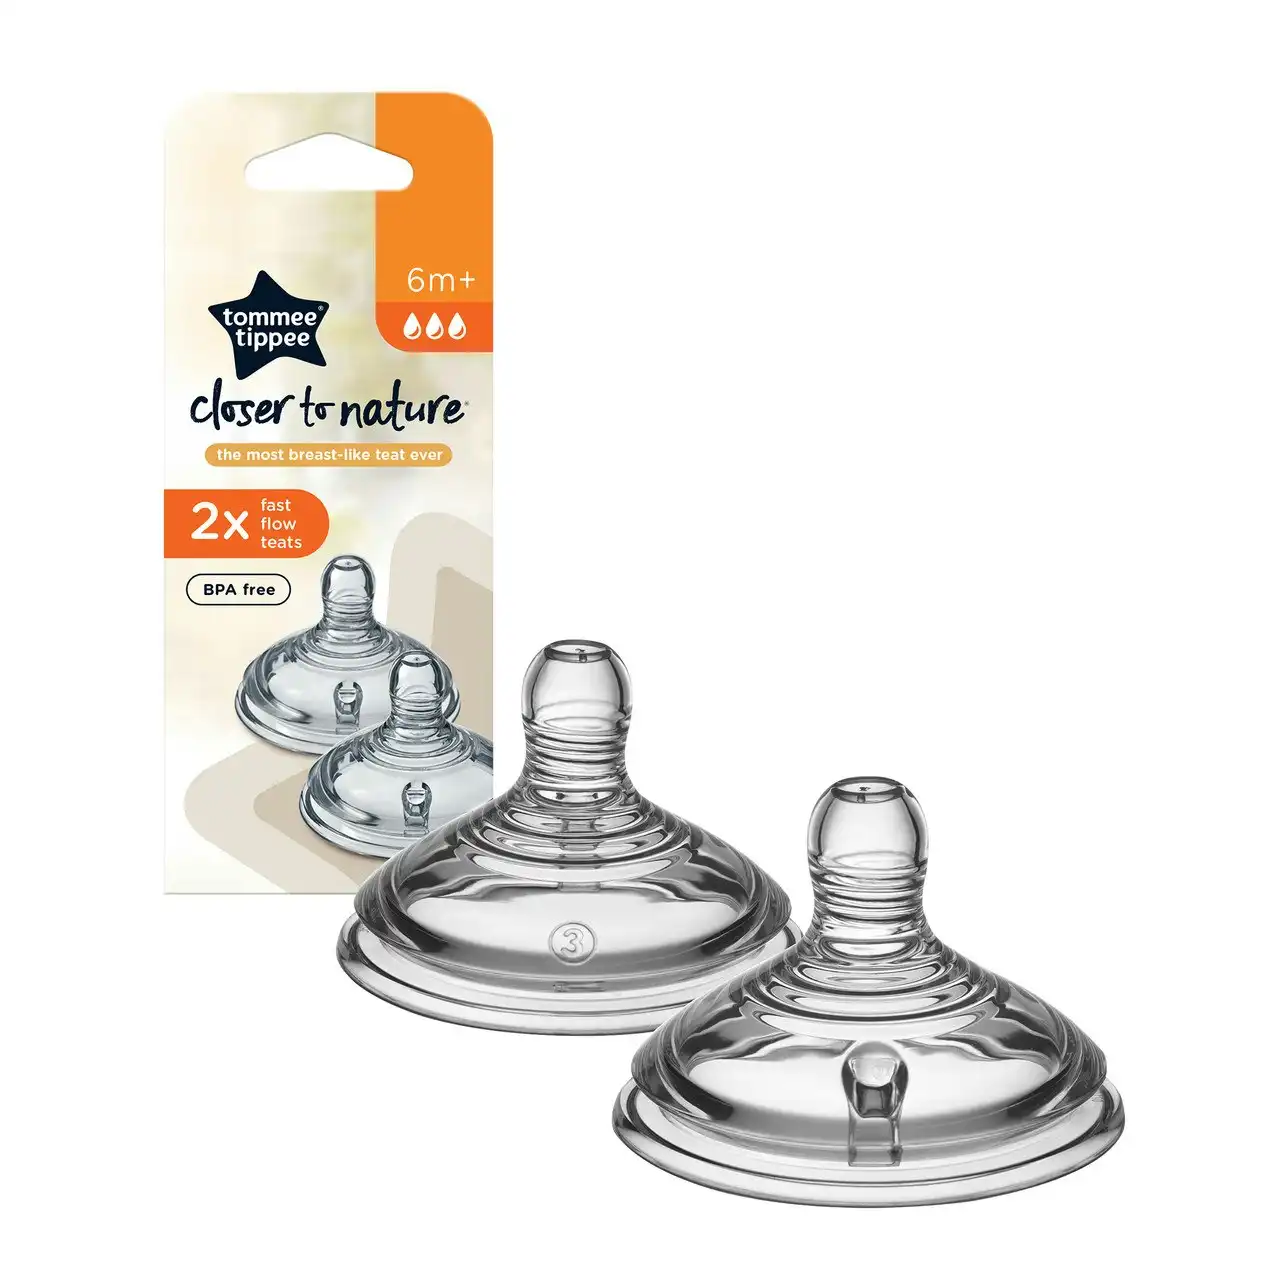 Tommee Tippee Closer to Nature Baby Bottle Teats, Breast-like, Anti-colic Valve, Soft Silicone, Fast Flow, 6m+, 2 Pack